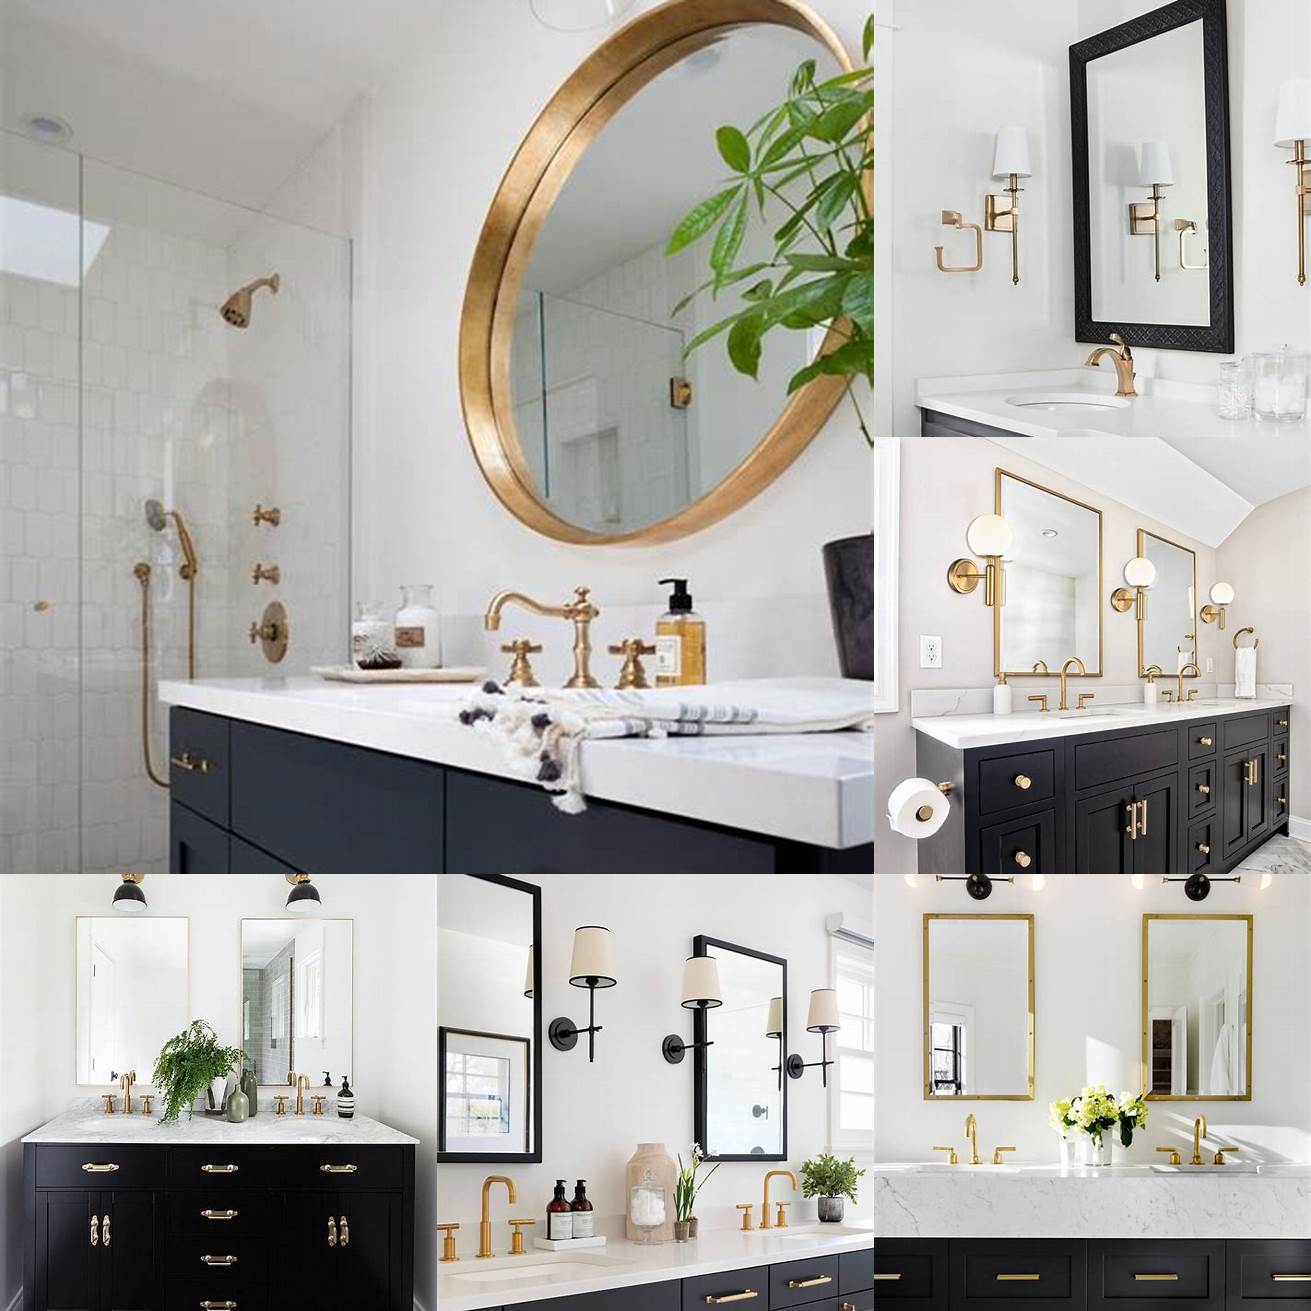 Accessorize your dark bathroom vanity with gold fixtures for a touch of glamour